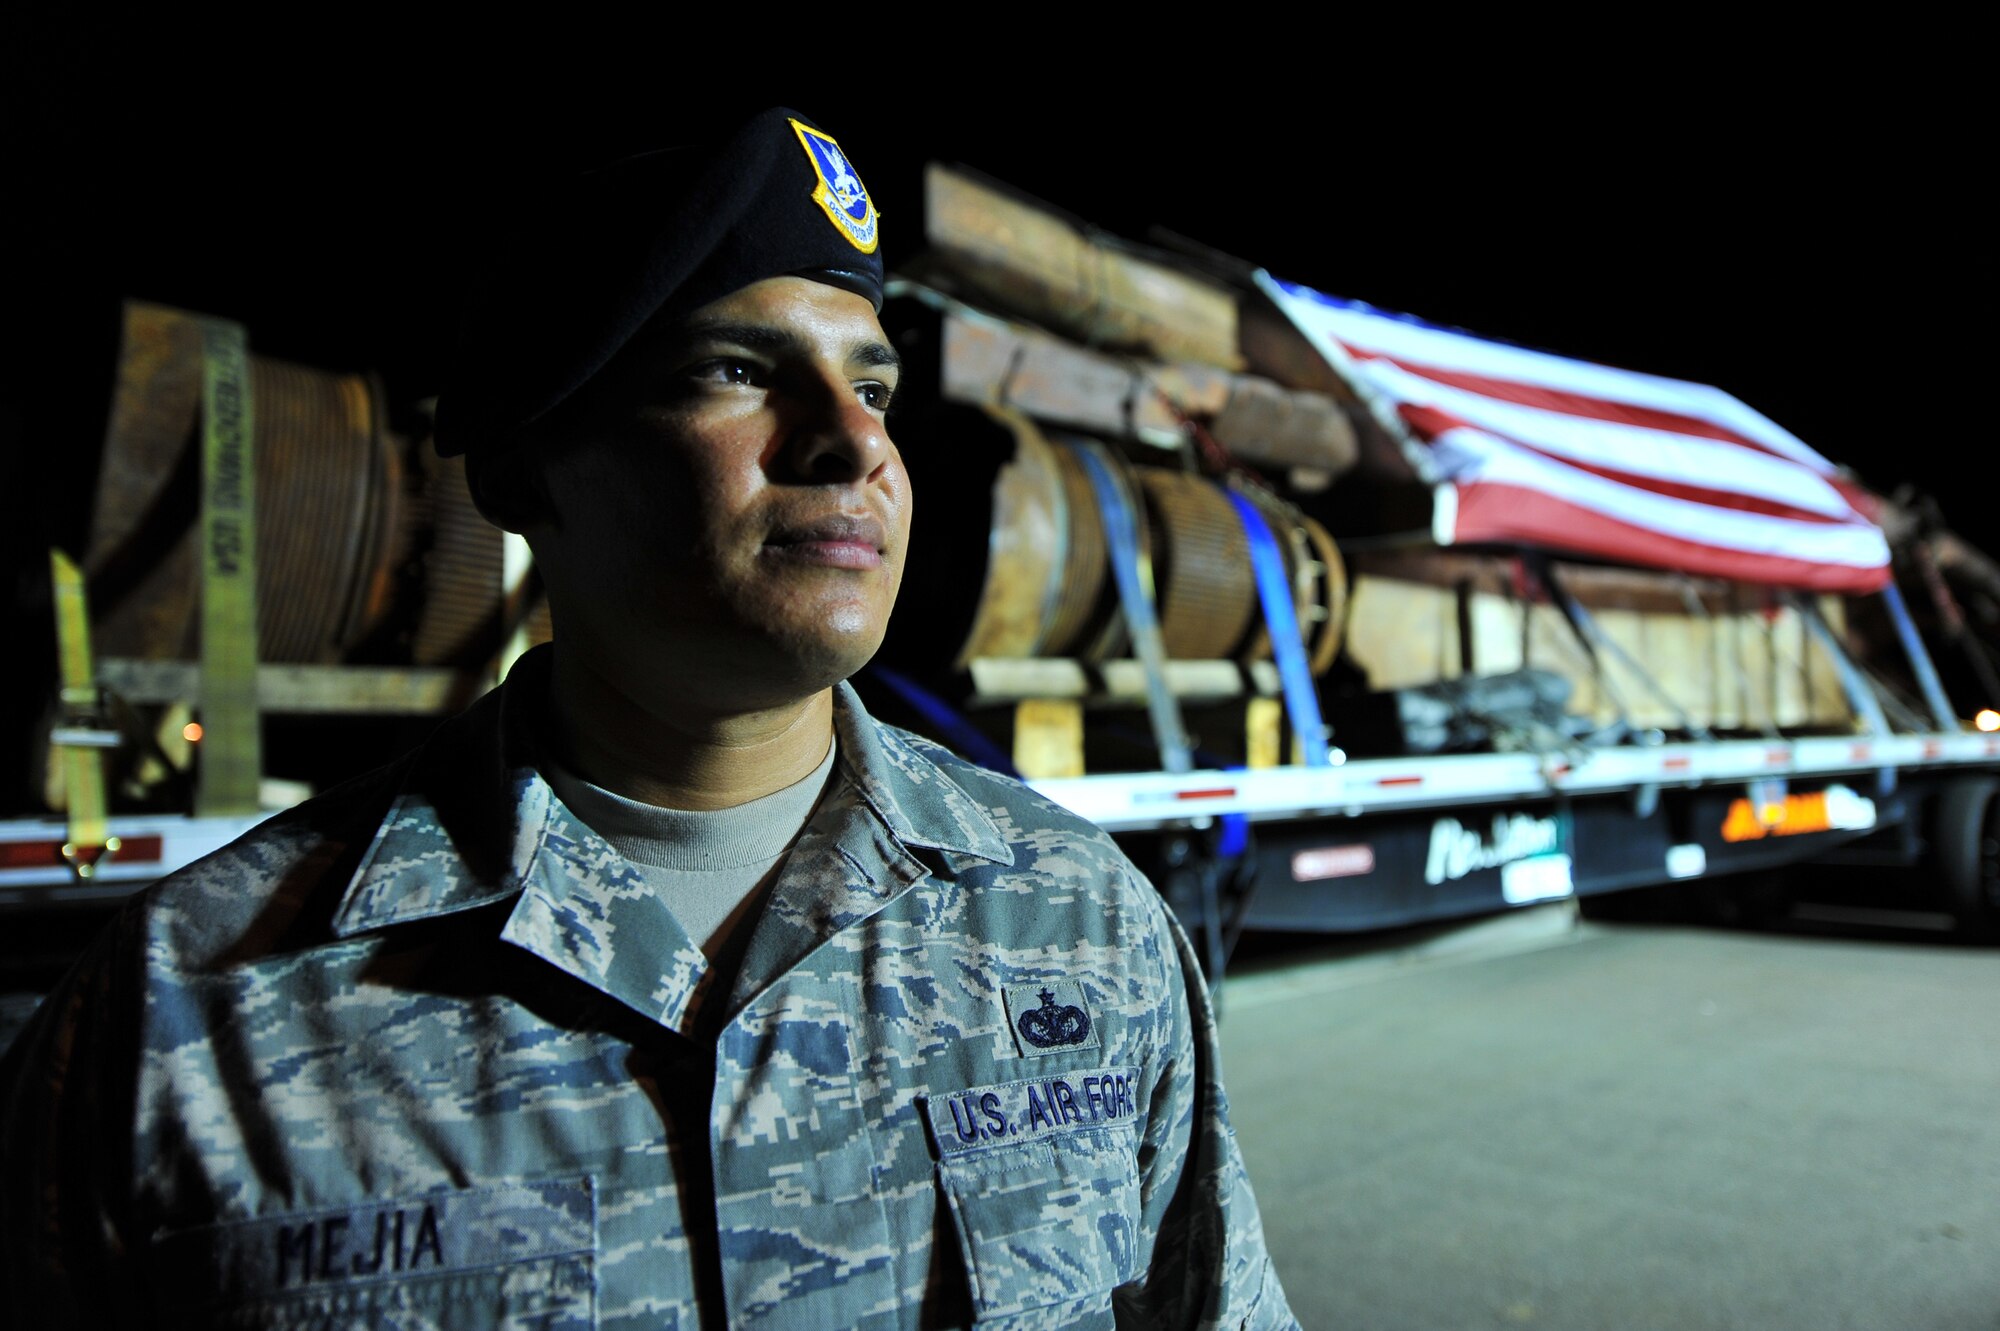 BUCKLEY AIR FORCE BASE, Colo. -- Staff  Sgt. Brandon Mejia, 460th Security Forces Squadron, stands in front of pieces of the World Trade Center Aug. 7, 2011. The 230,000 pounds of rusted steel stopped at Buckley AFB overnight on its way to its final destination in downtown Denver, Colo. Mejia will keep vigil over the shipment until dawn. (U.S. Force photo by Staff Sgt. Kathrine McDowell)